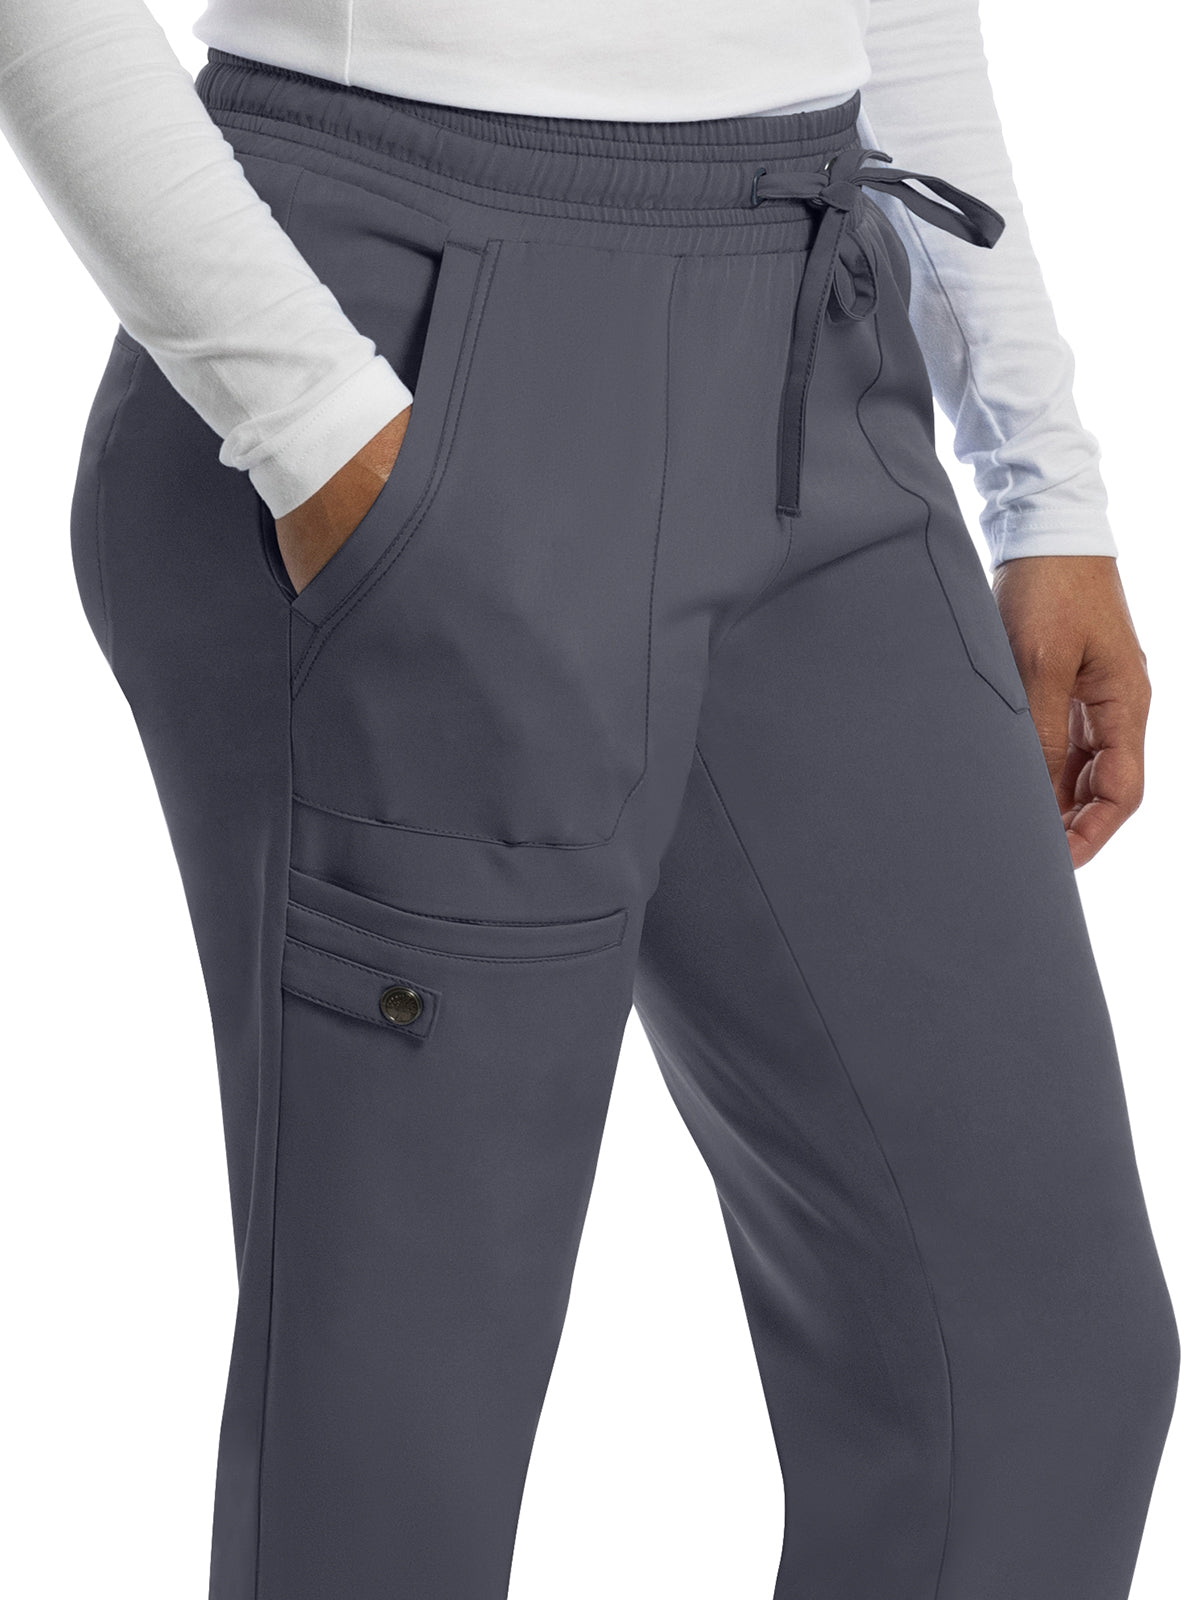 Women's Four-Way Stretch Fabric Pant - 9575 - Pewter